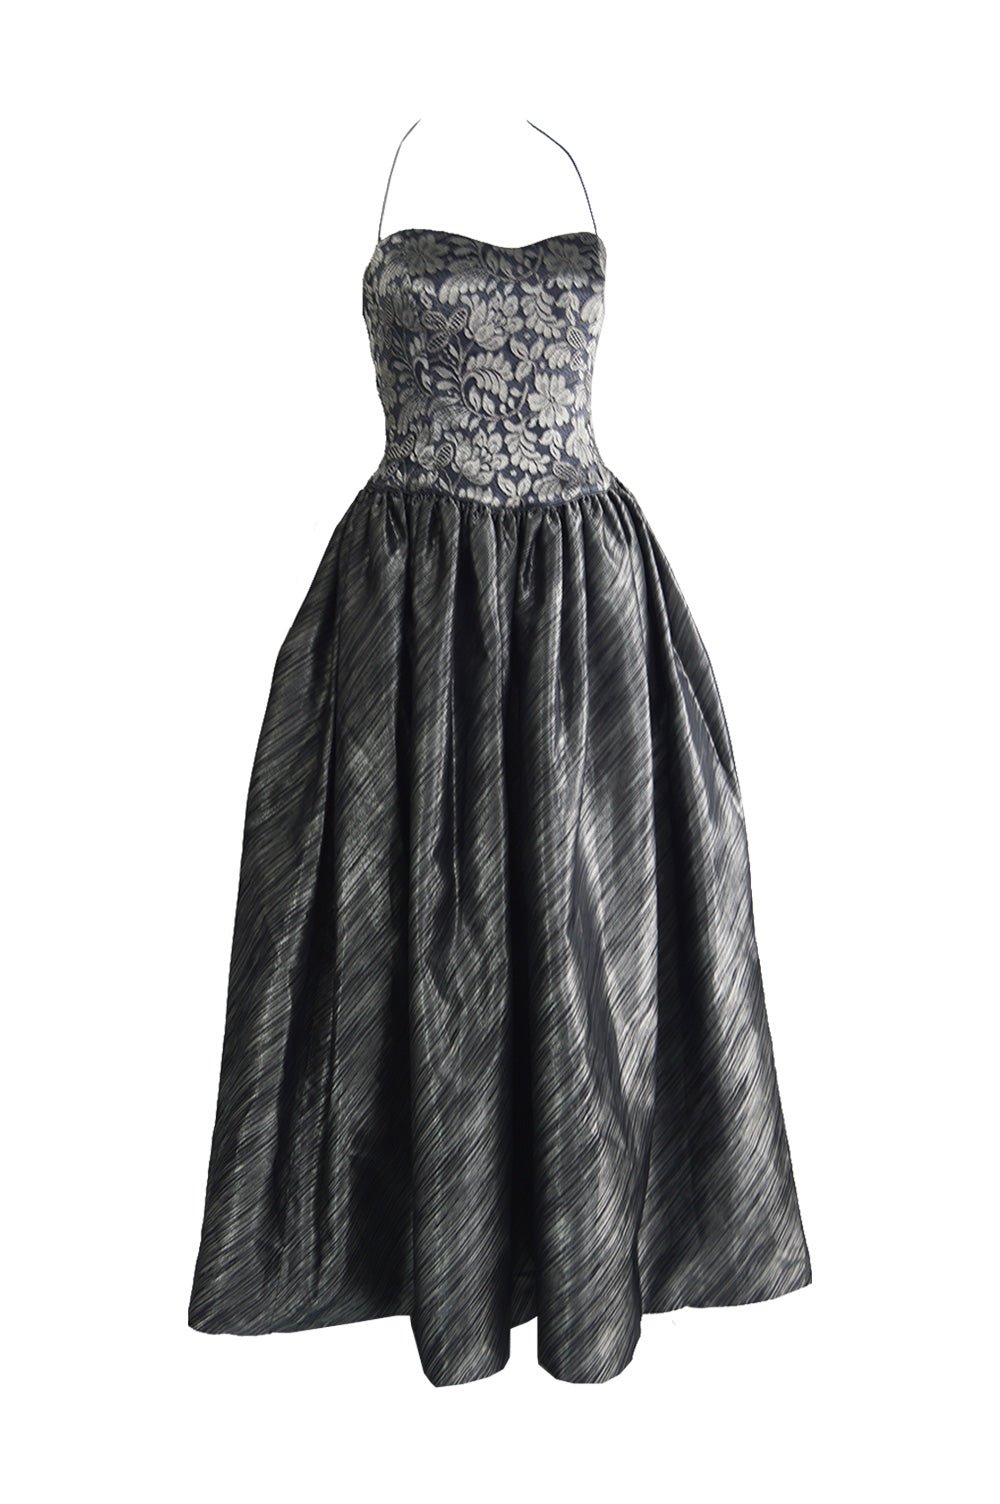 Vintage Silver Lace & Lamé Full Skirt Evening Gown